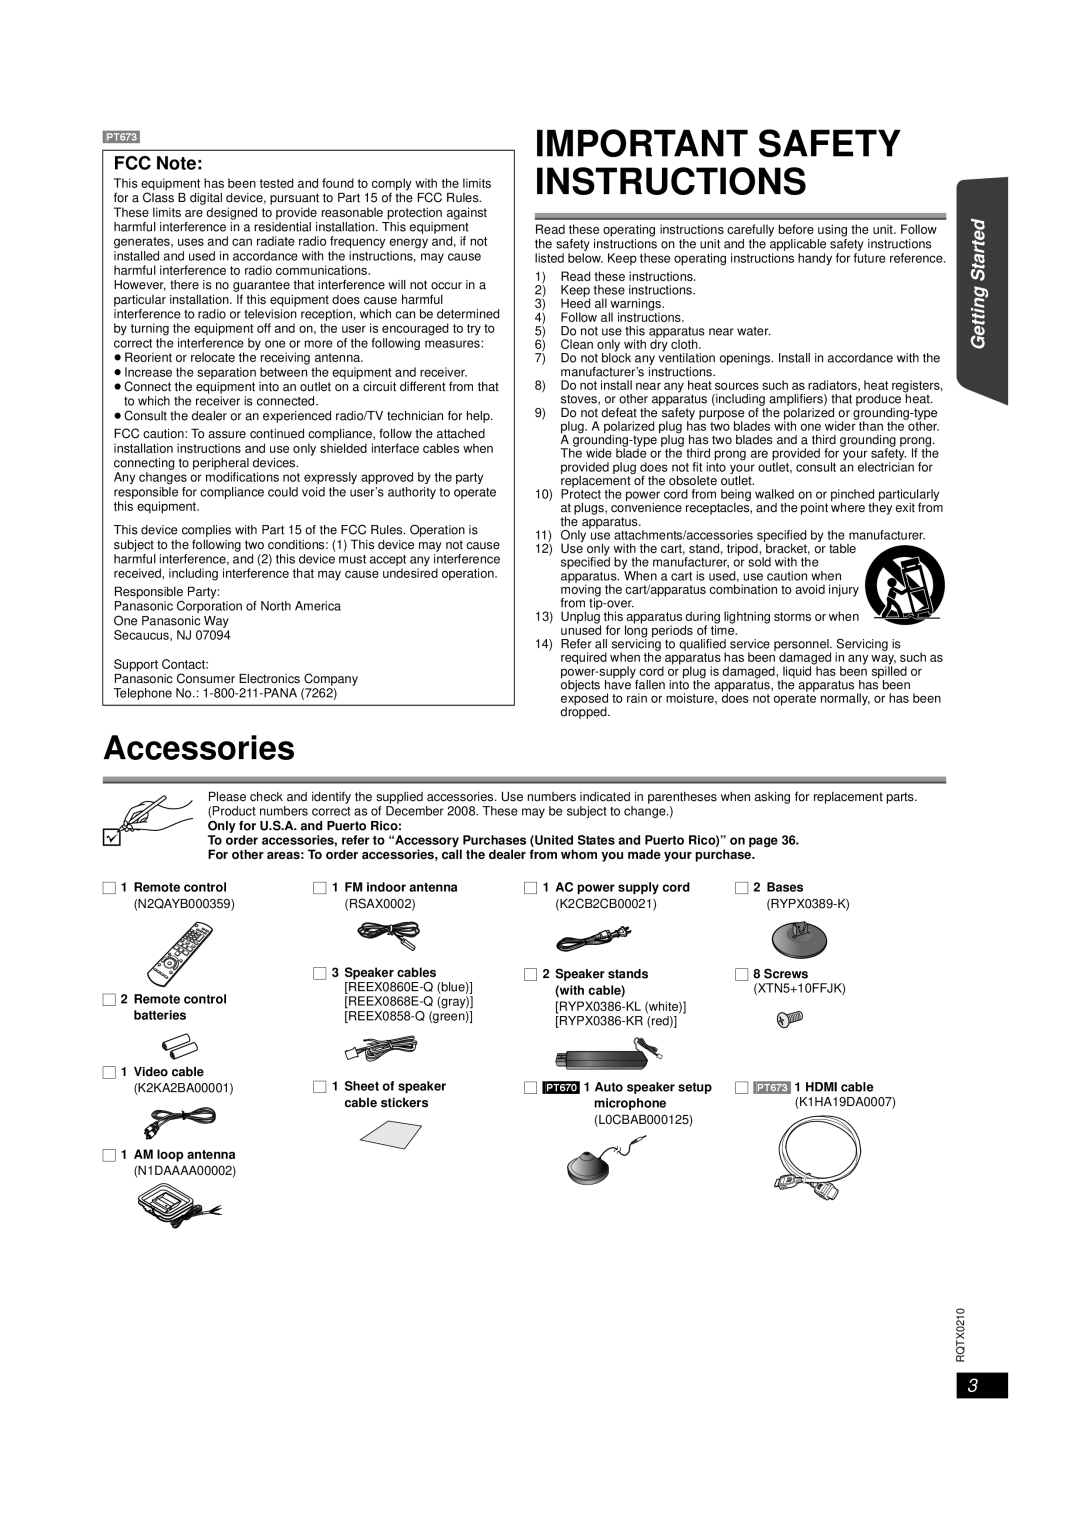 Panasonic SC-PT673 Accessories, Getting Started Playing Discs Operations, Other Reference, Important Safety Instructions 